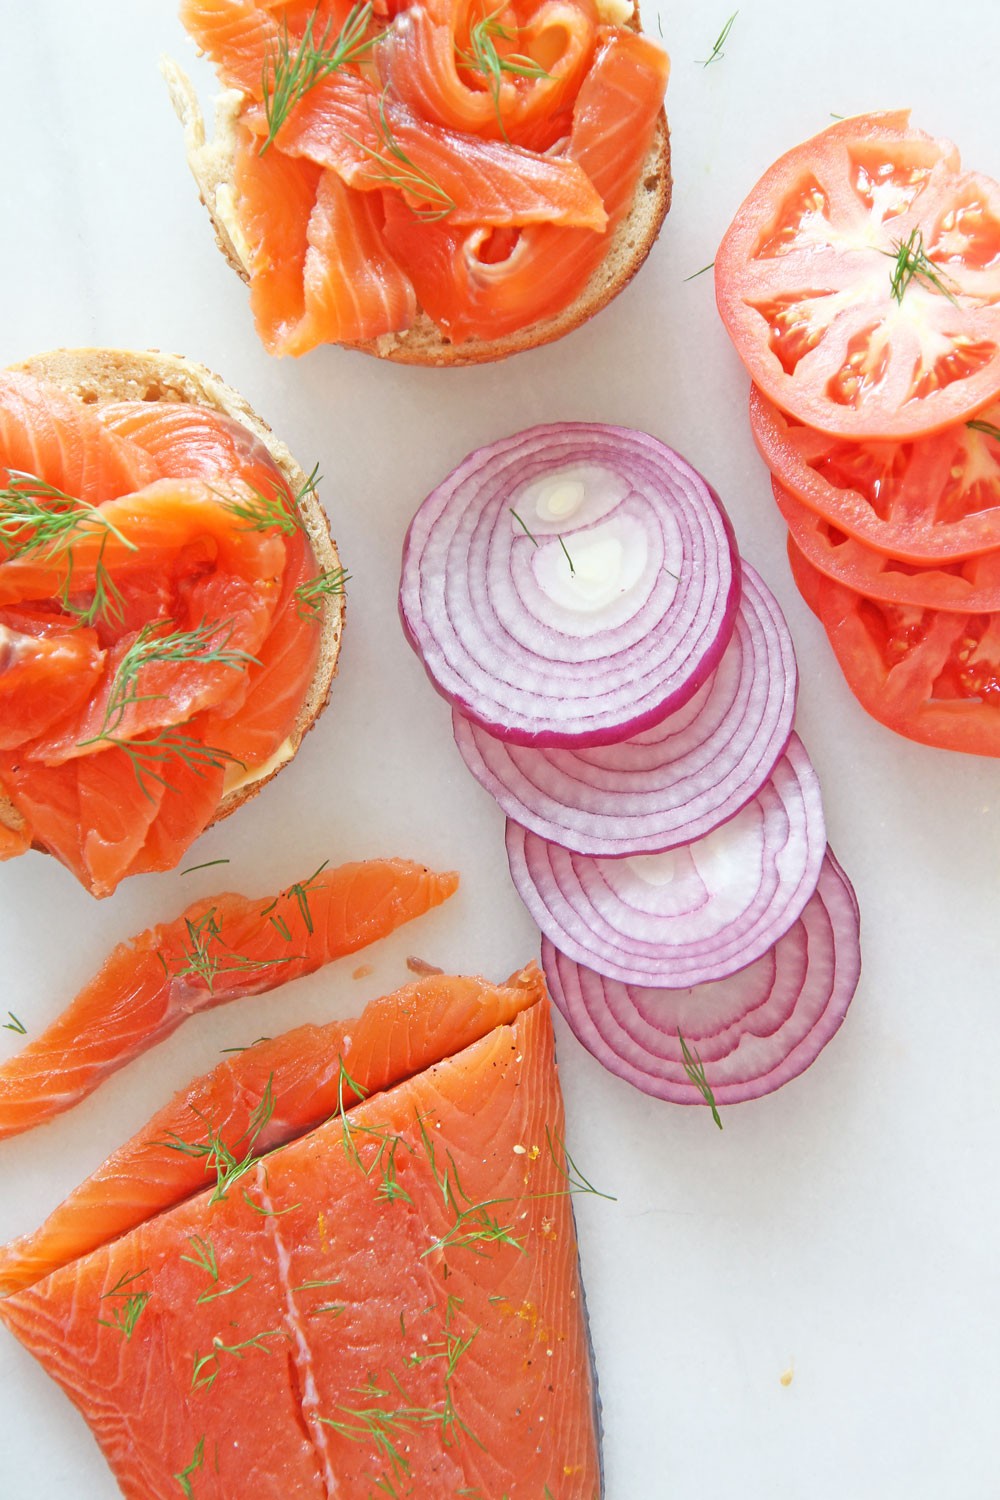 How To Make Homemade Lox (gravlax). NYC bagel classic that is as easy as salt and sugar. This salmon recipe is all done in the fridge and is a perfect brunch idea. Happy Cooking! www.ChopHappy.com #gravlax #homemadelox